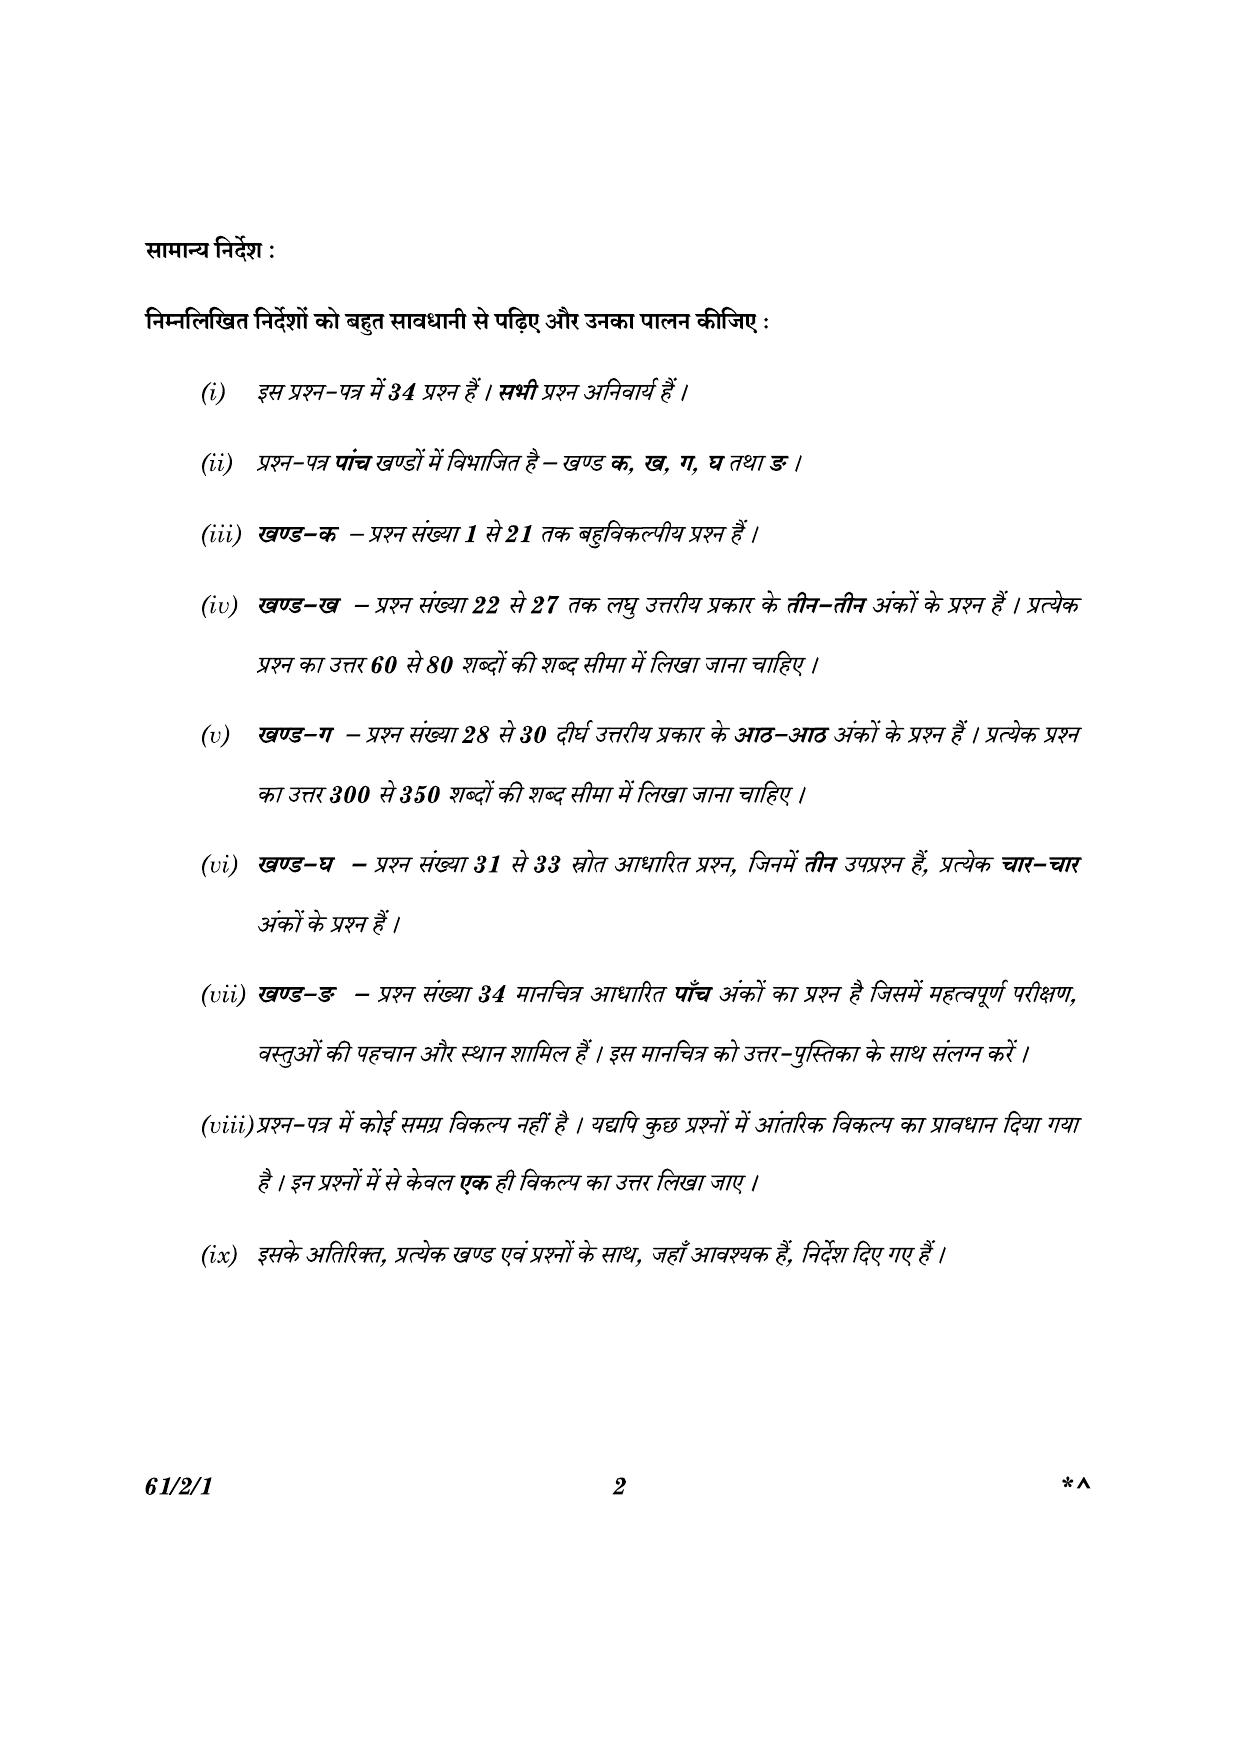 CBSE Class 12 61-2-1 History 2023 Question Paper - Page 2